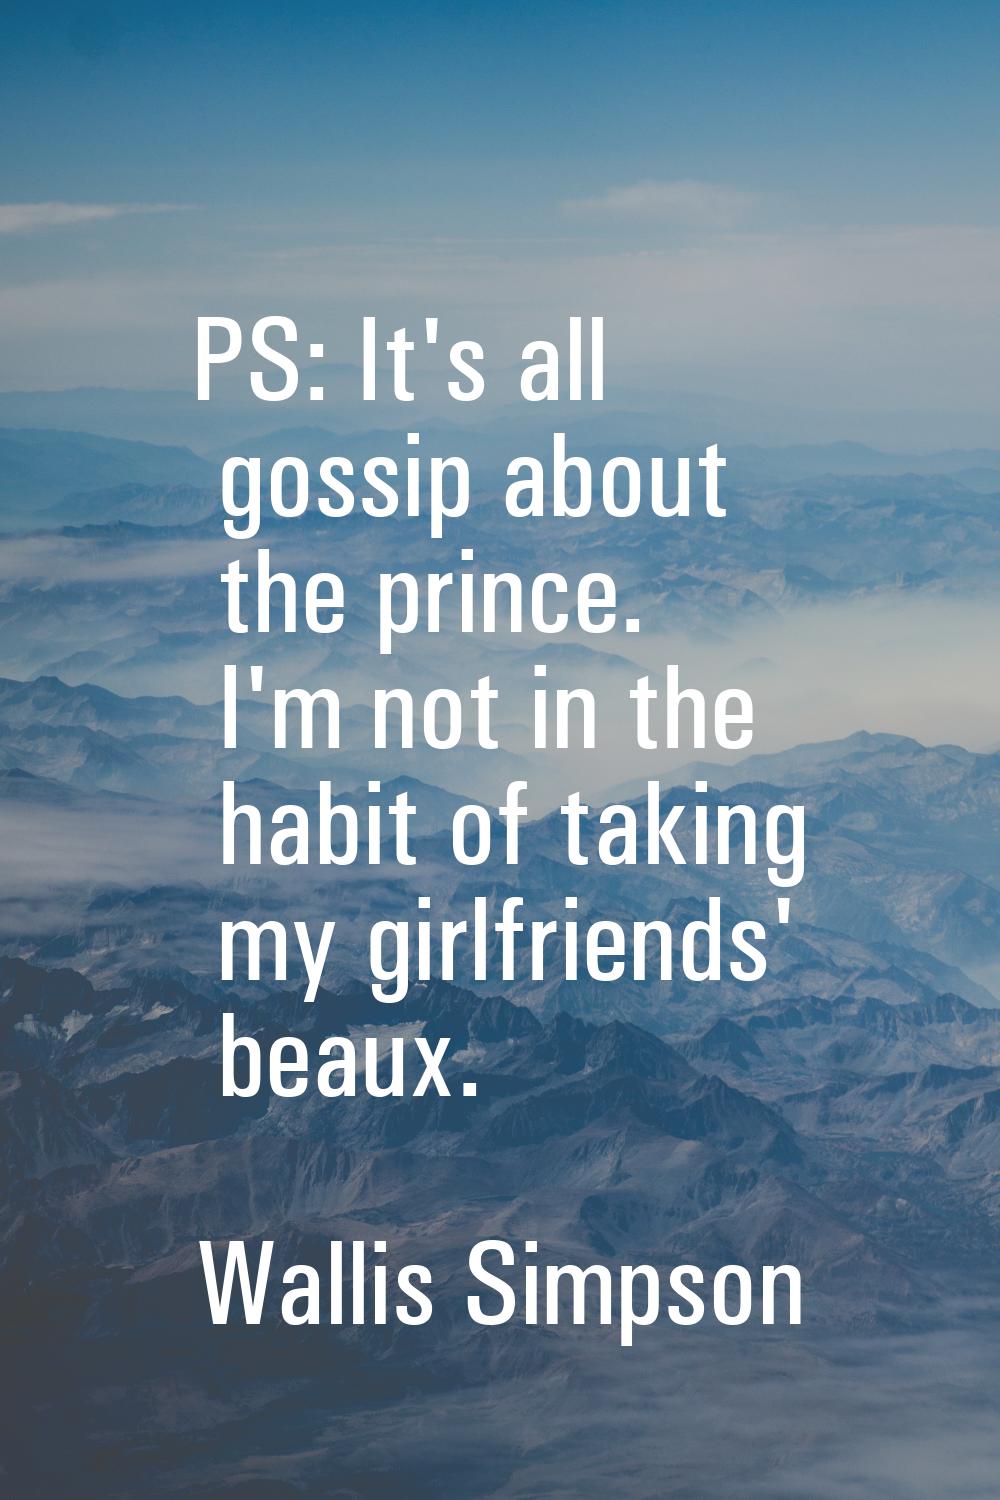 PS: It's all gossip about the prince. I'm not in the habit of taking my girlfriends' beaux.